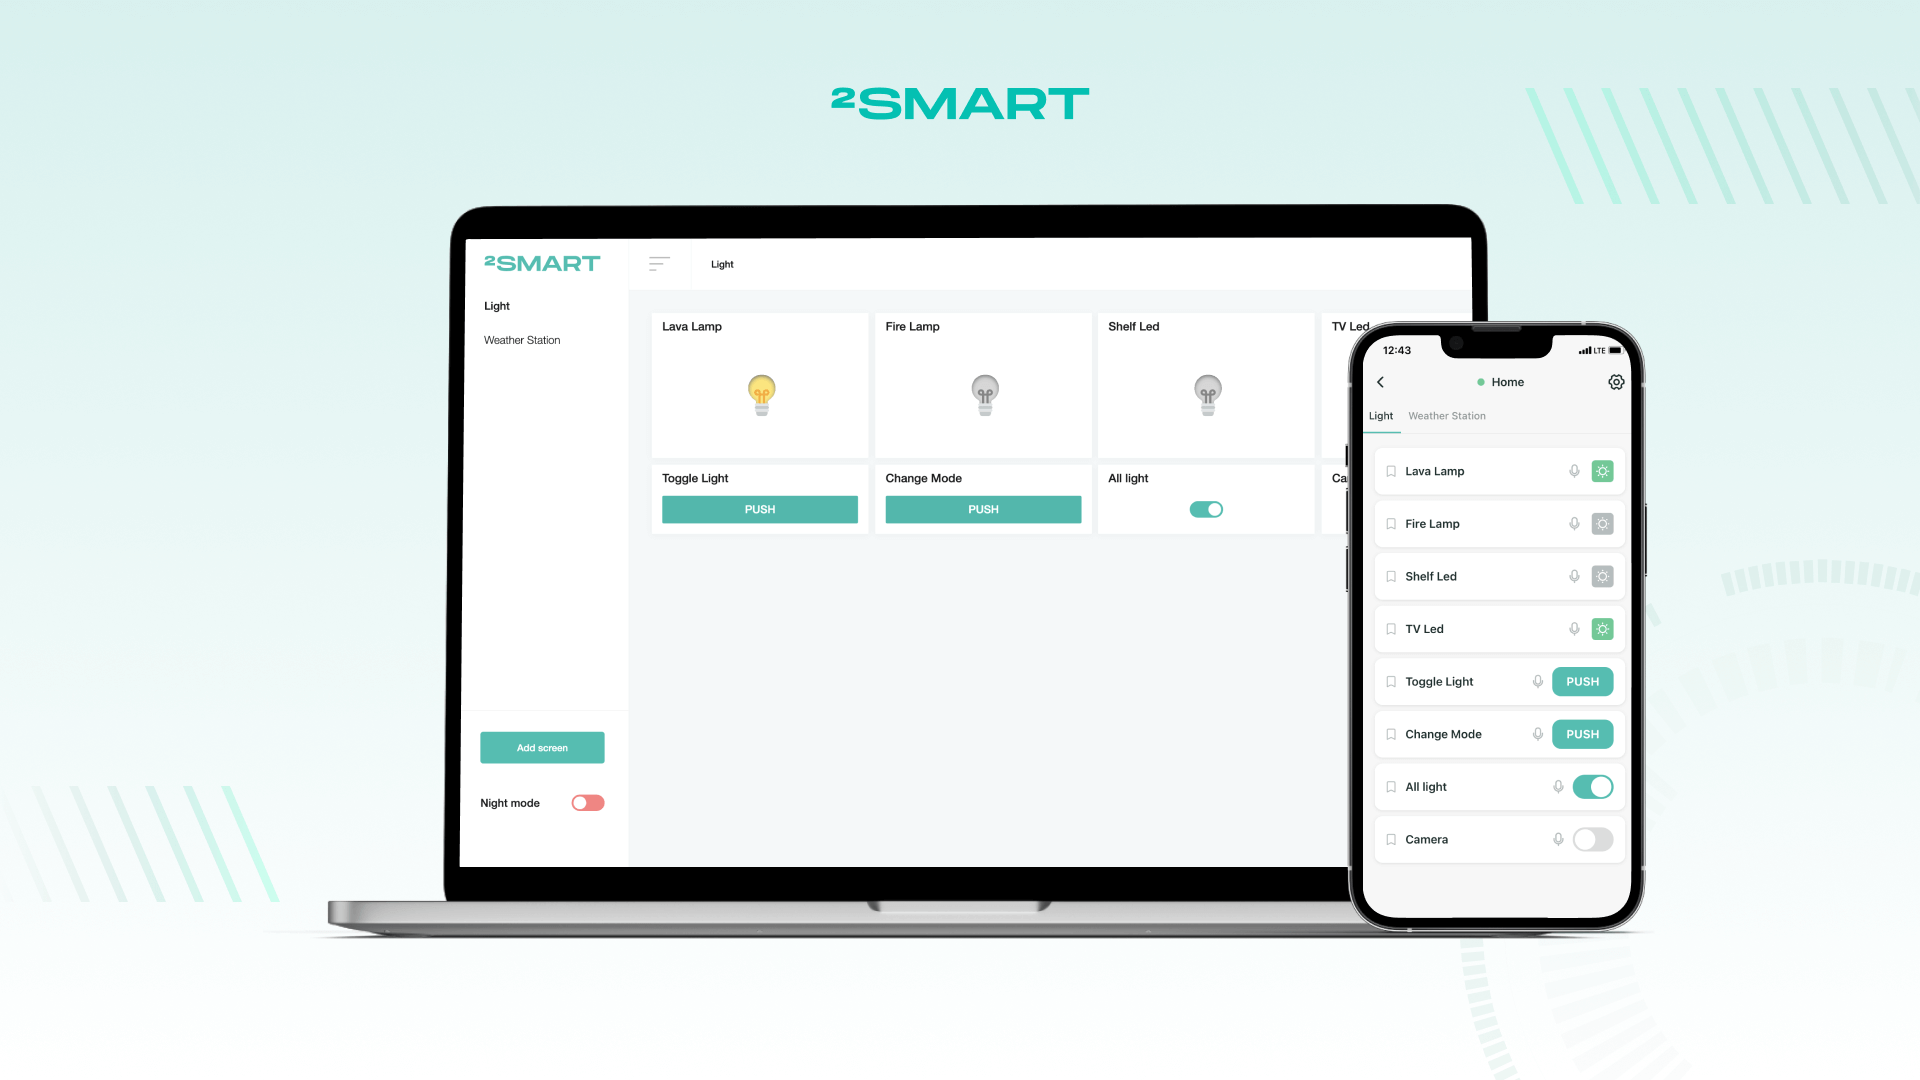 How to control 2Smart Standalone devices from the 2Smart Cloud mobile app